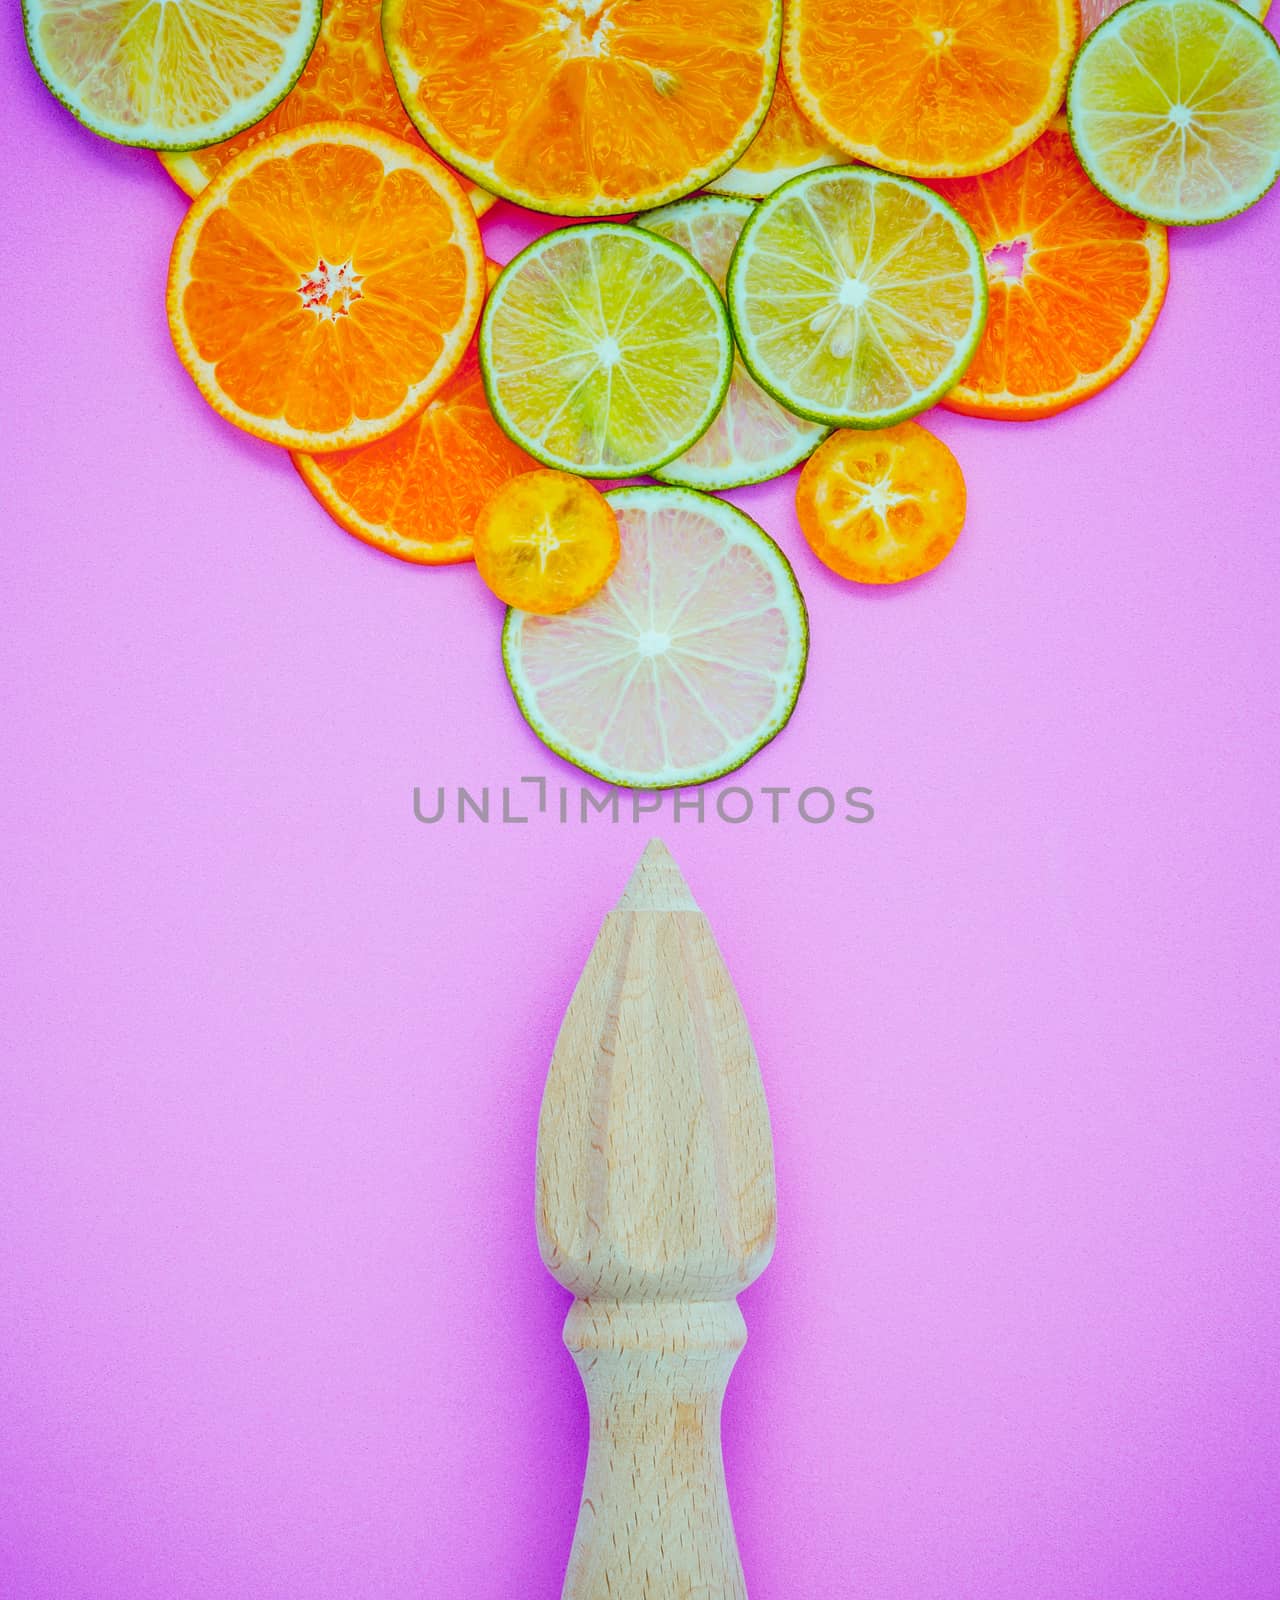 Mixed fresh citrus fruits and wooden juicer for summer citrus ju by kerdkanno